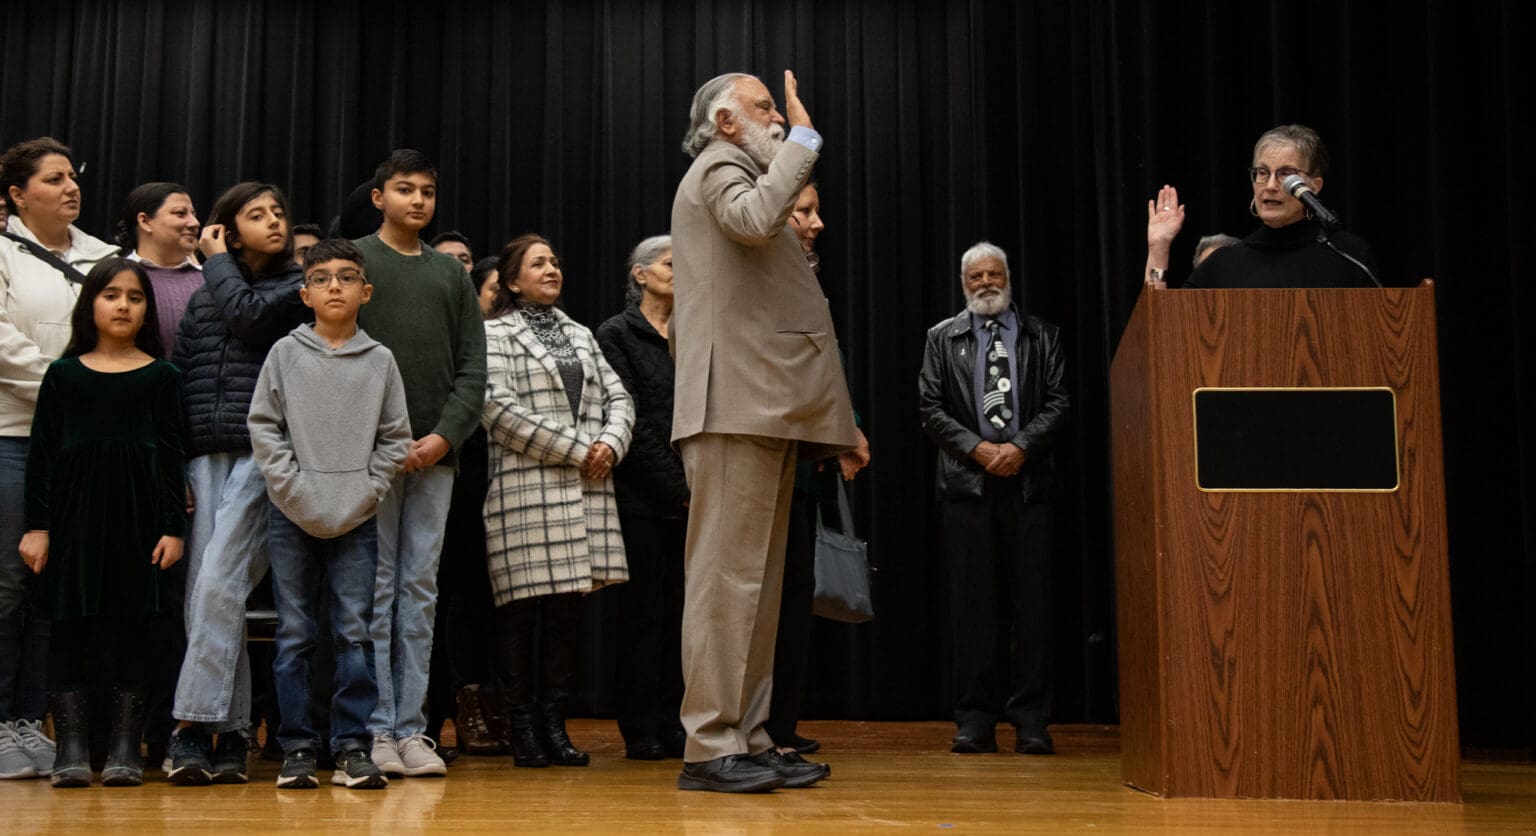 Surrounded by family, Satpal Sidhu is sworn in by county Auditor Diana Bradrick behind a wooden podium.